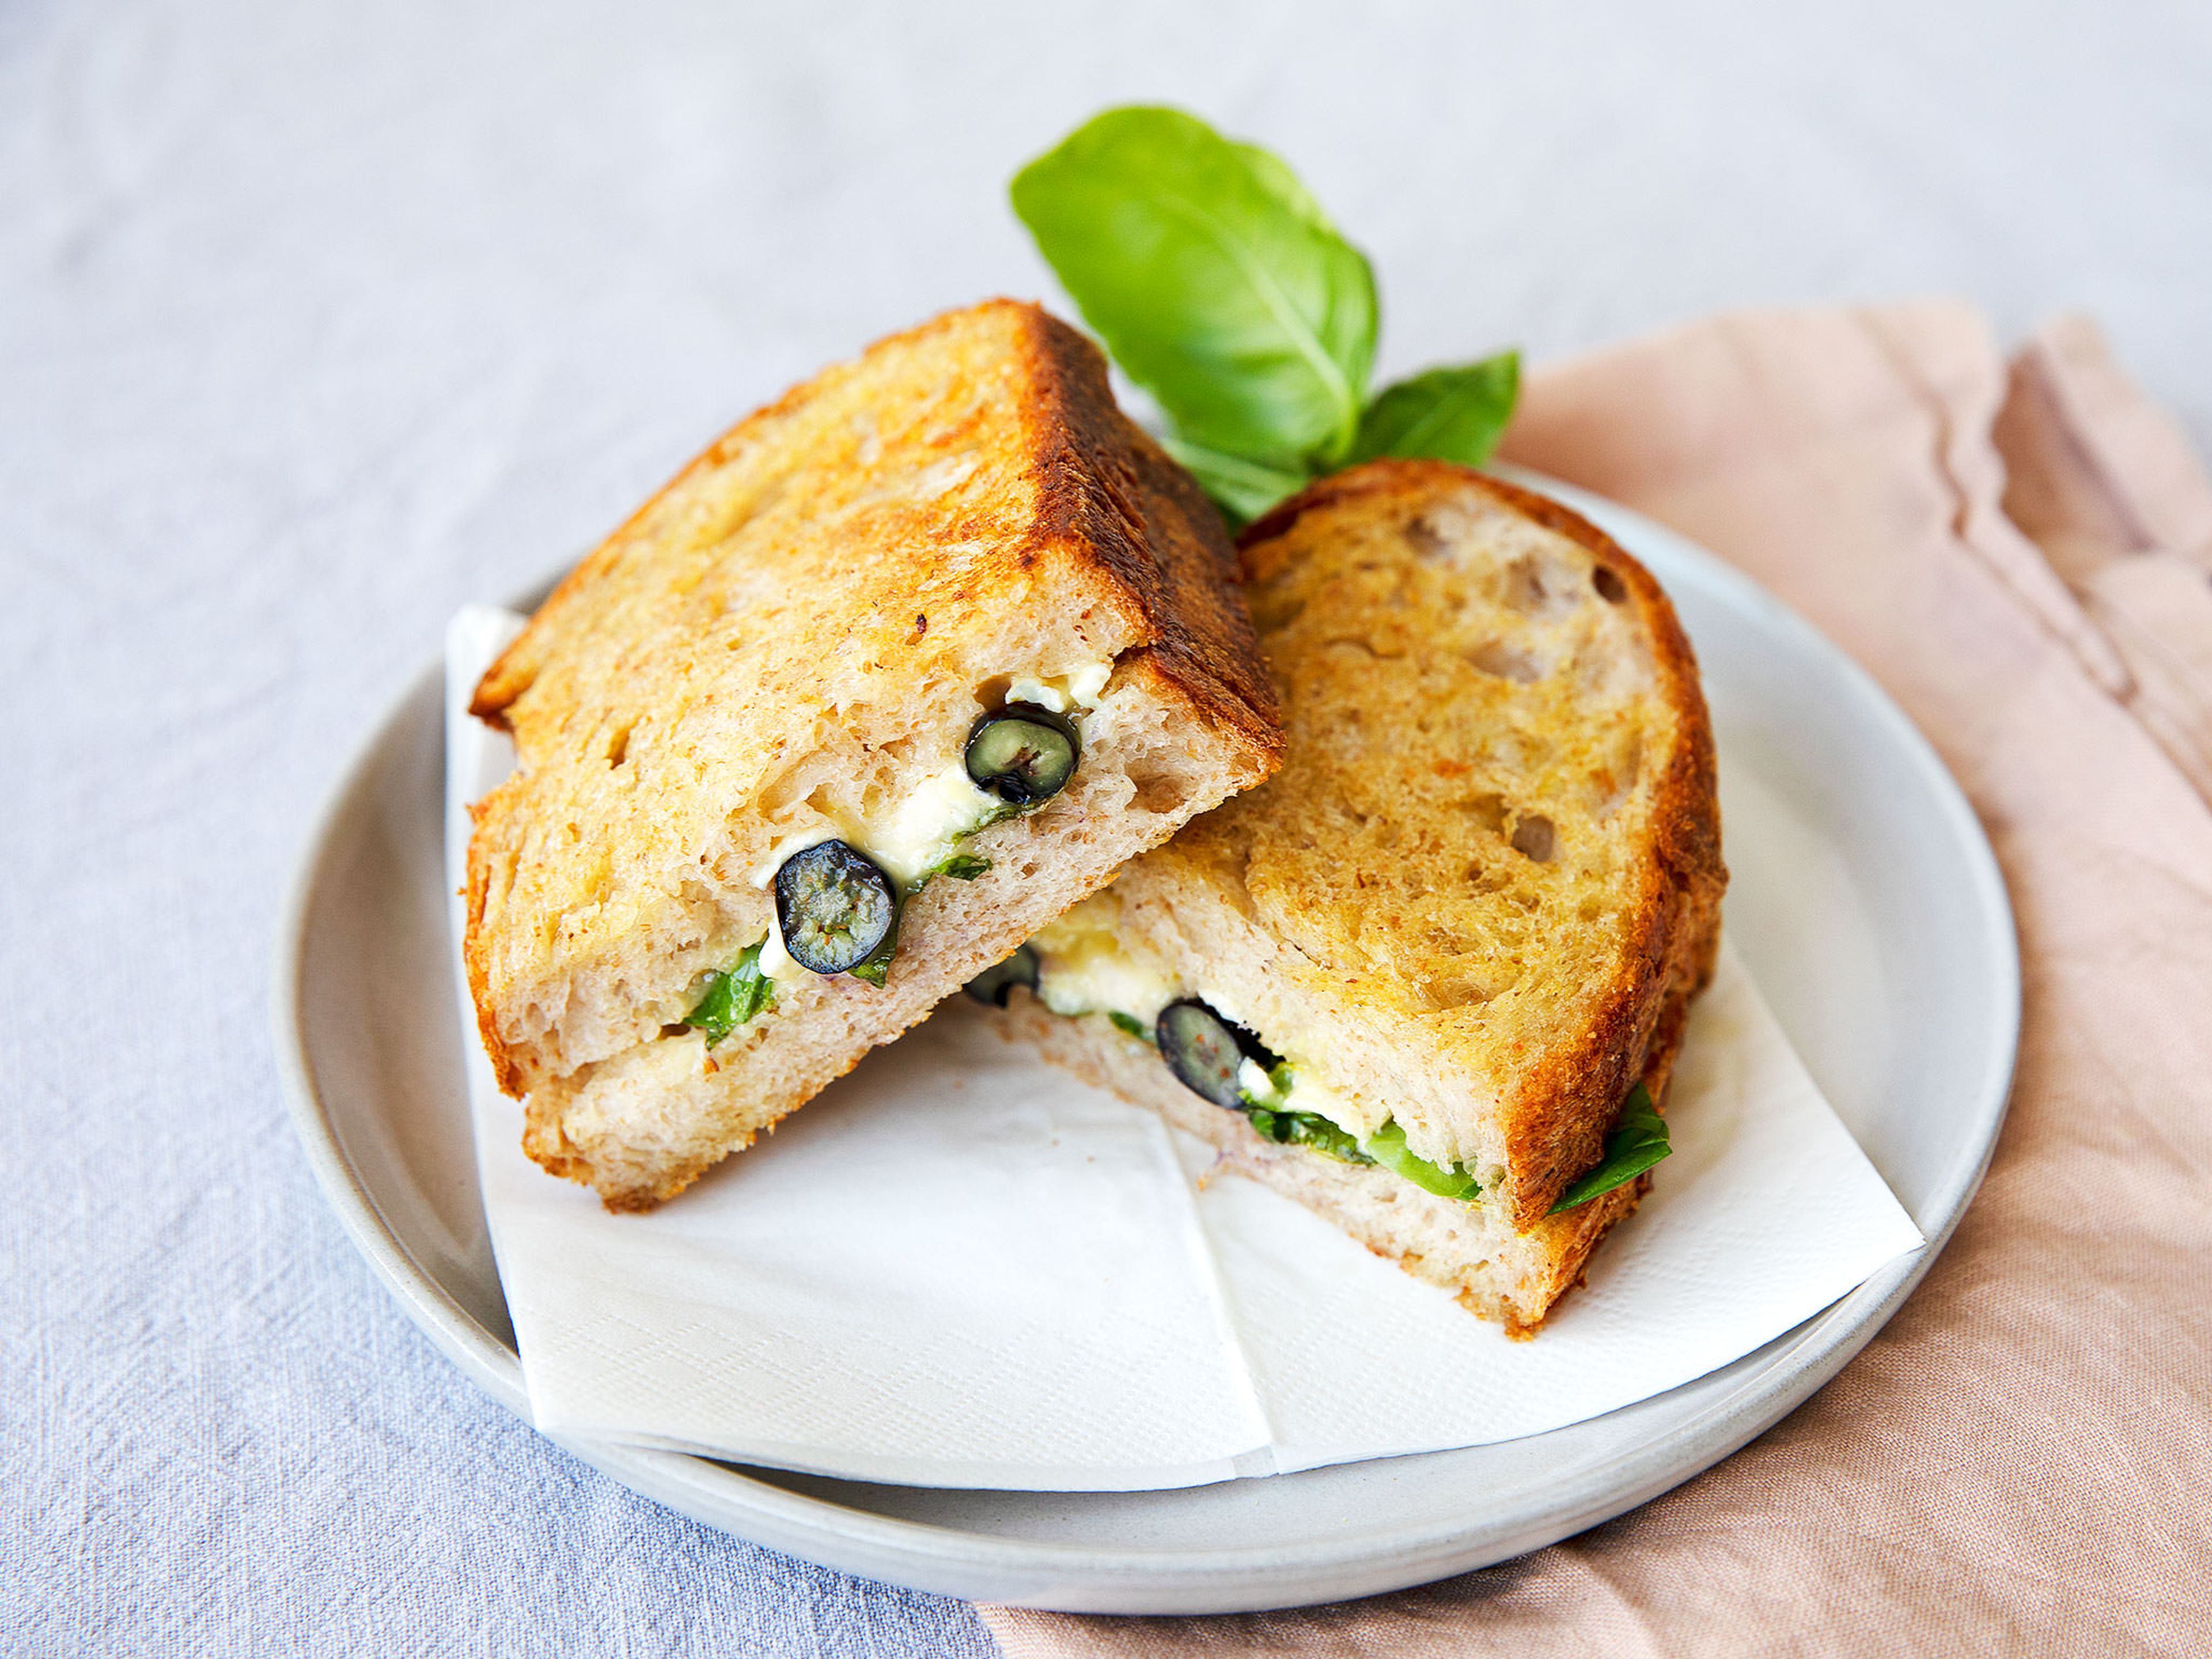 Grilled blueberry and Camembert sandwich